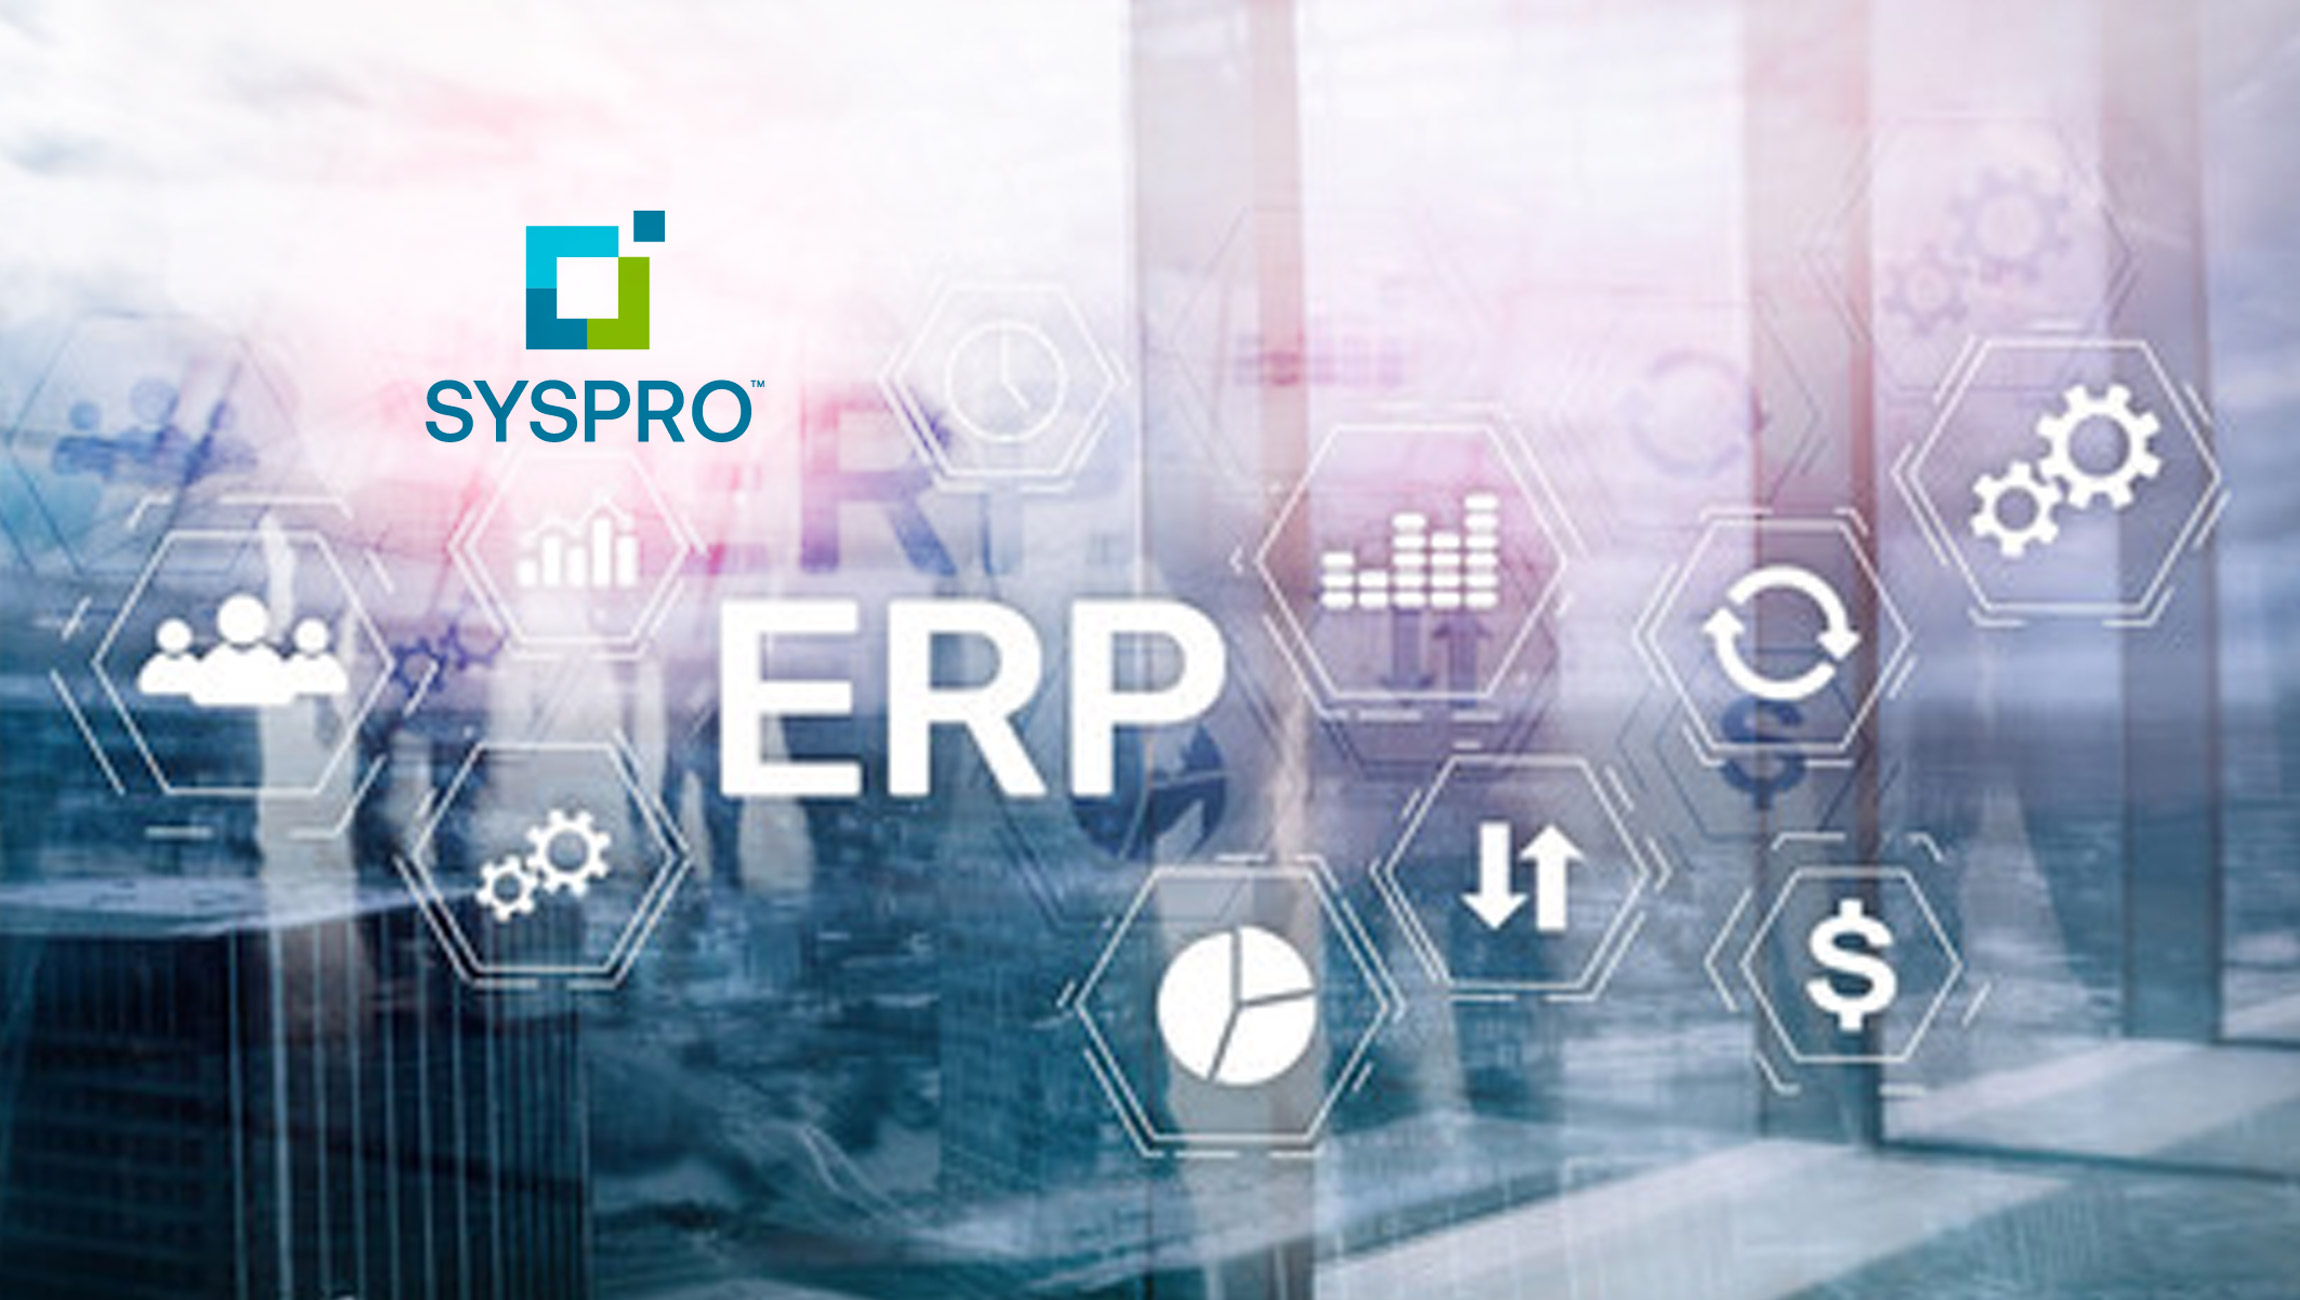 SYSPRO Honored as Stevie® Award Winner for ERP Solution in 2022 American Business Awards®